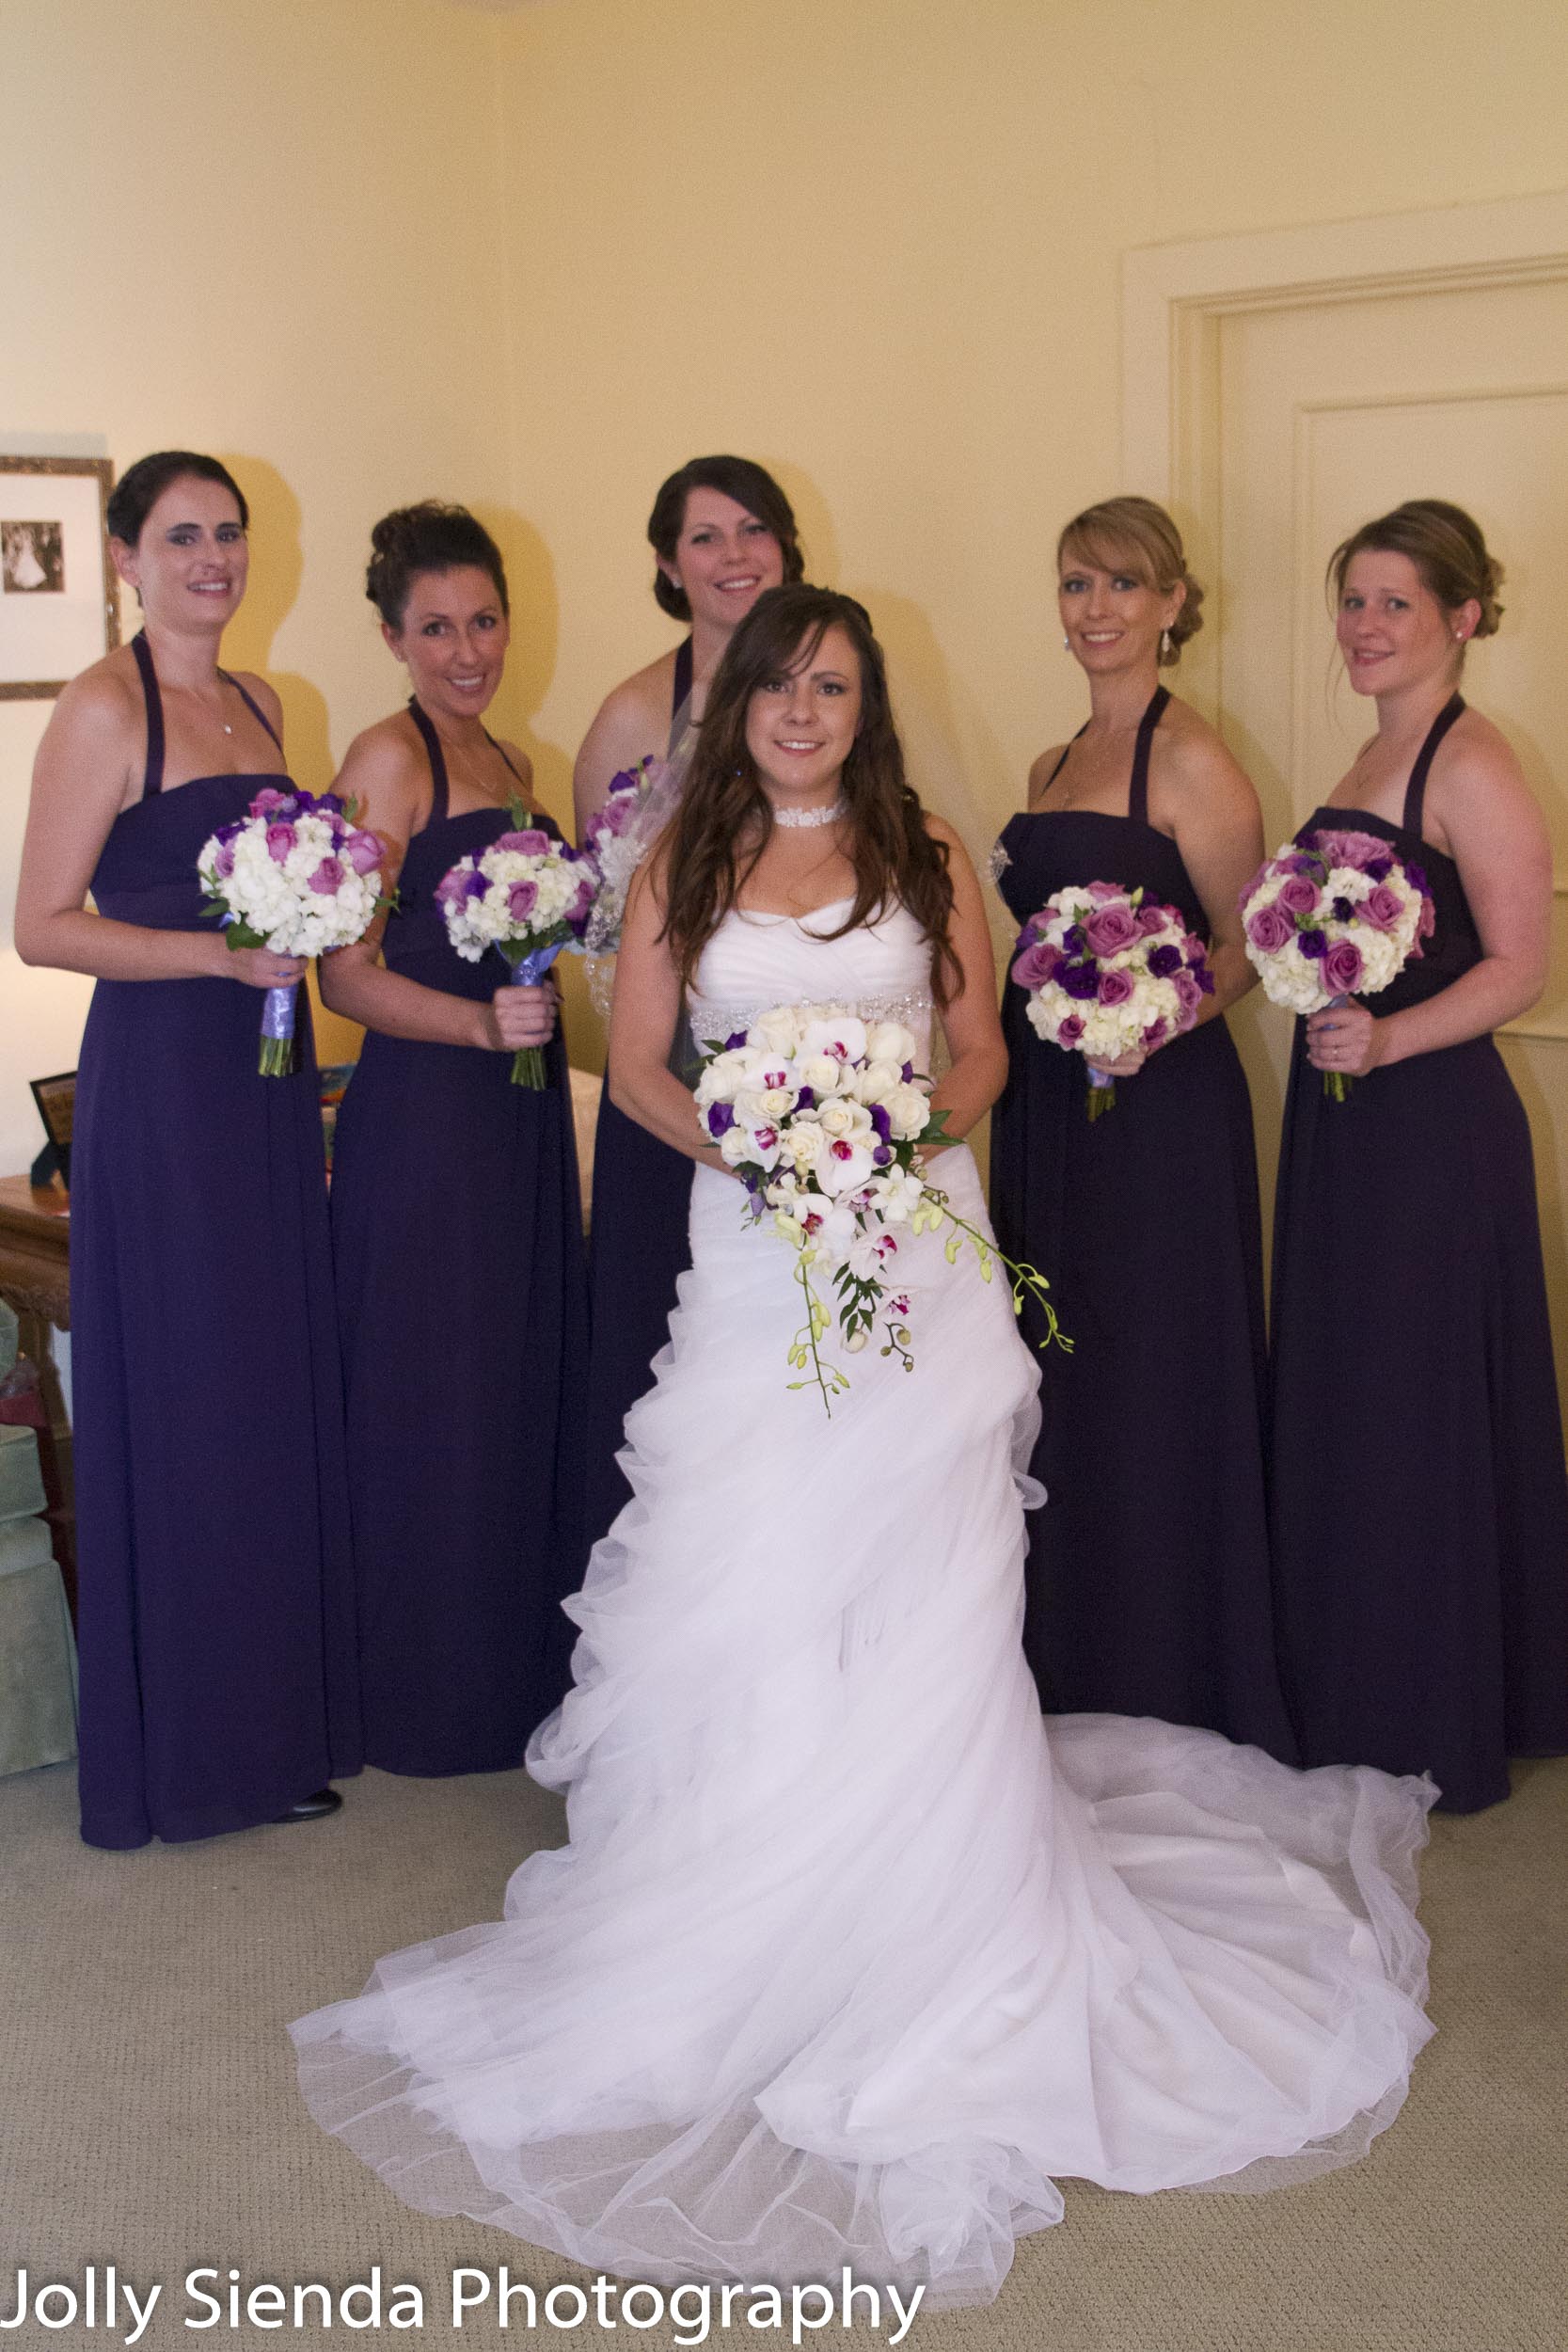 Portrait of a bride with her bridesmaids